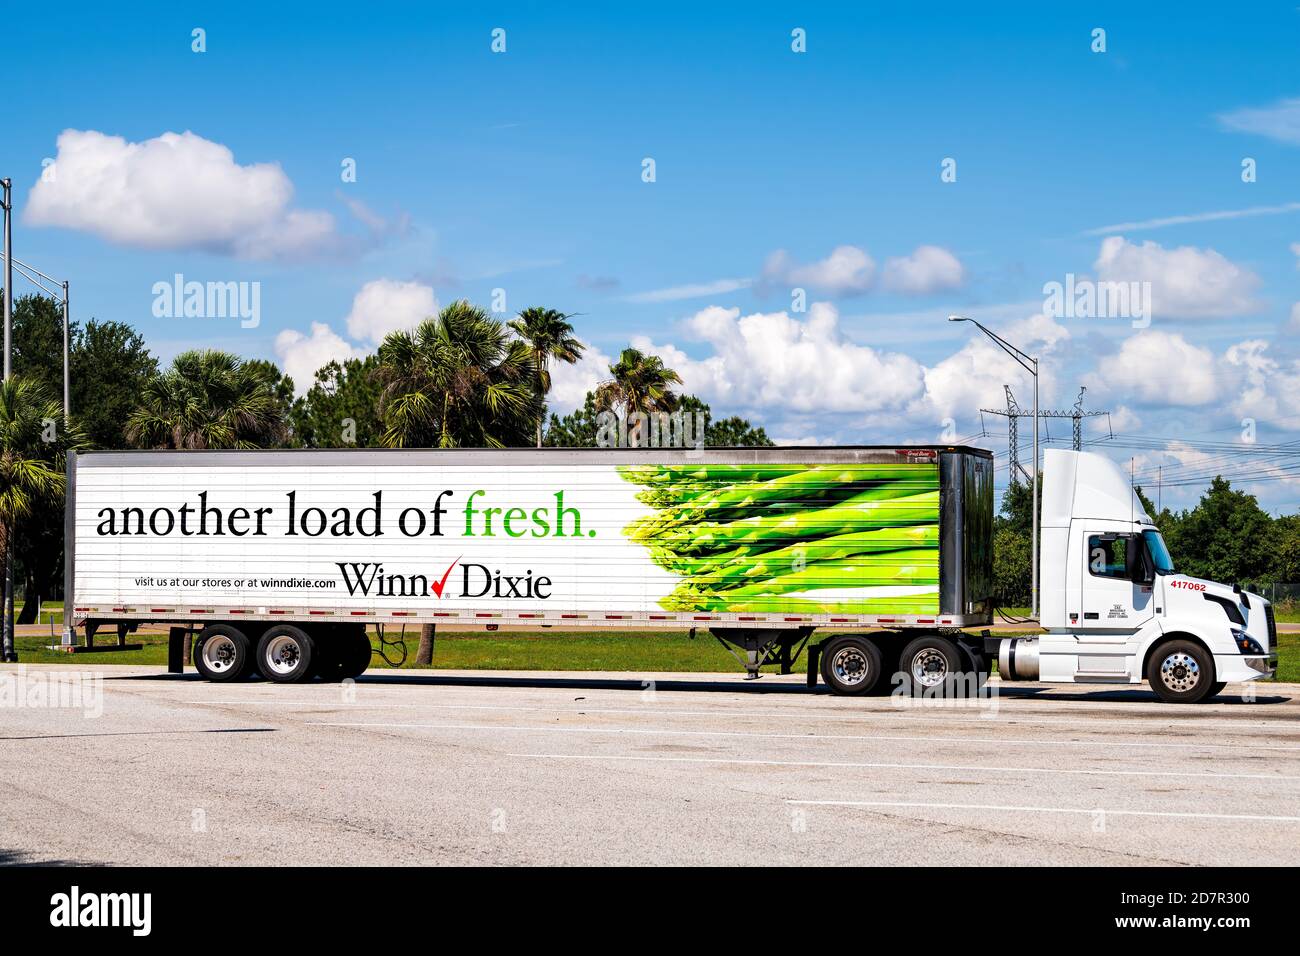 Ruskin, USA - April 27, 2018: Florida highway interstate 75 road in east Tampa with rest stop area and truck delivery vehicle for Winn Dixie with slog Stock Photo